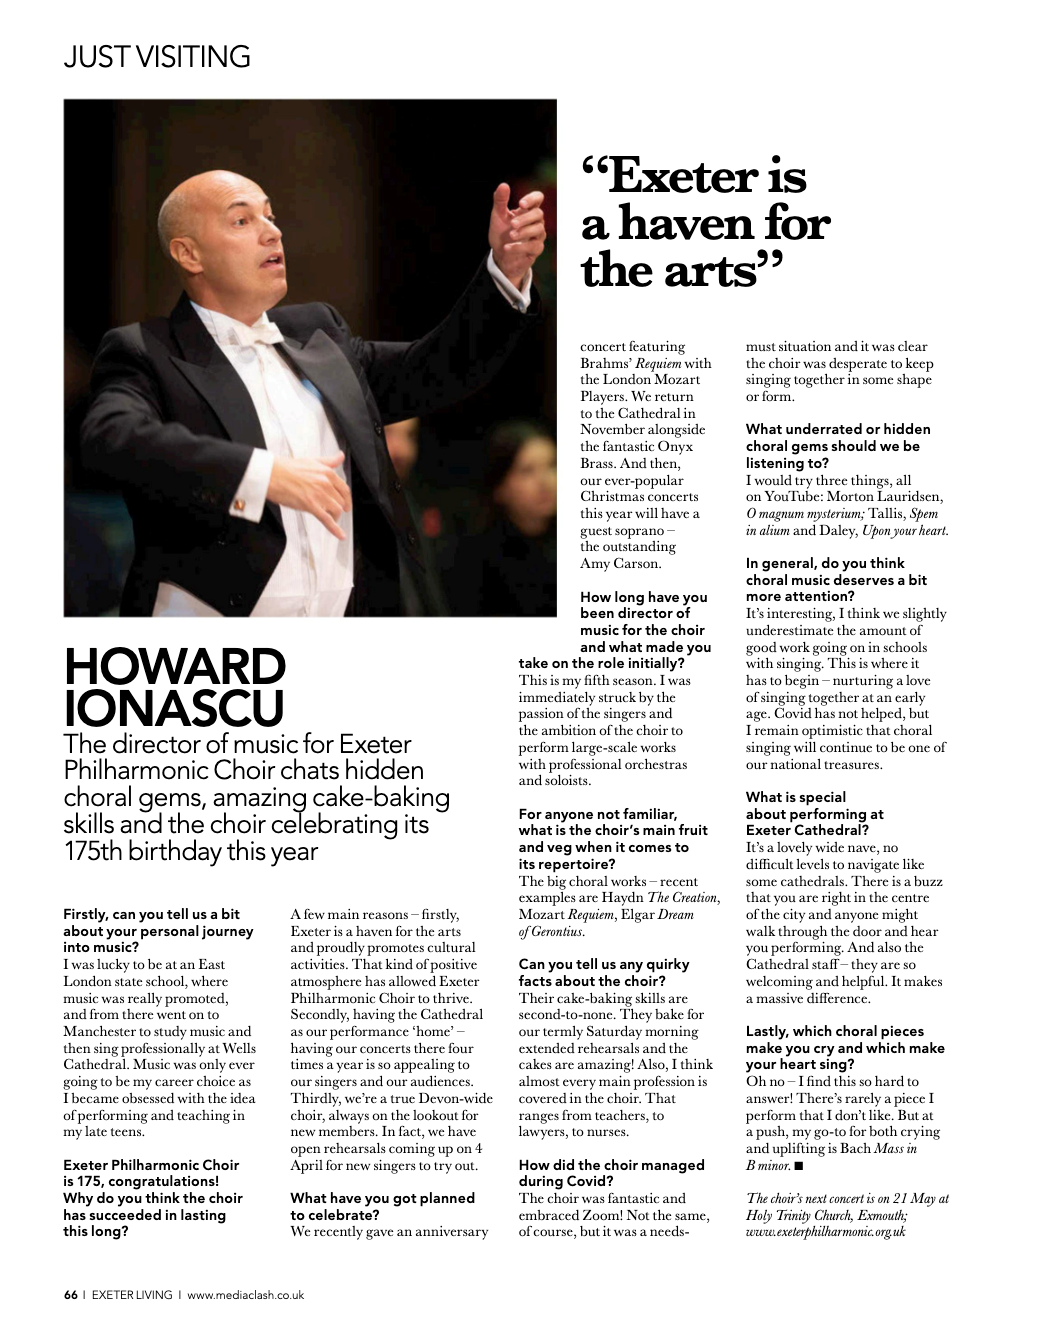 Celebrating 175 years: Exeter Living interviews our Director of Music, Howard Ionascu